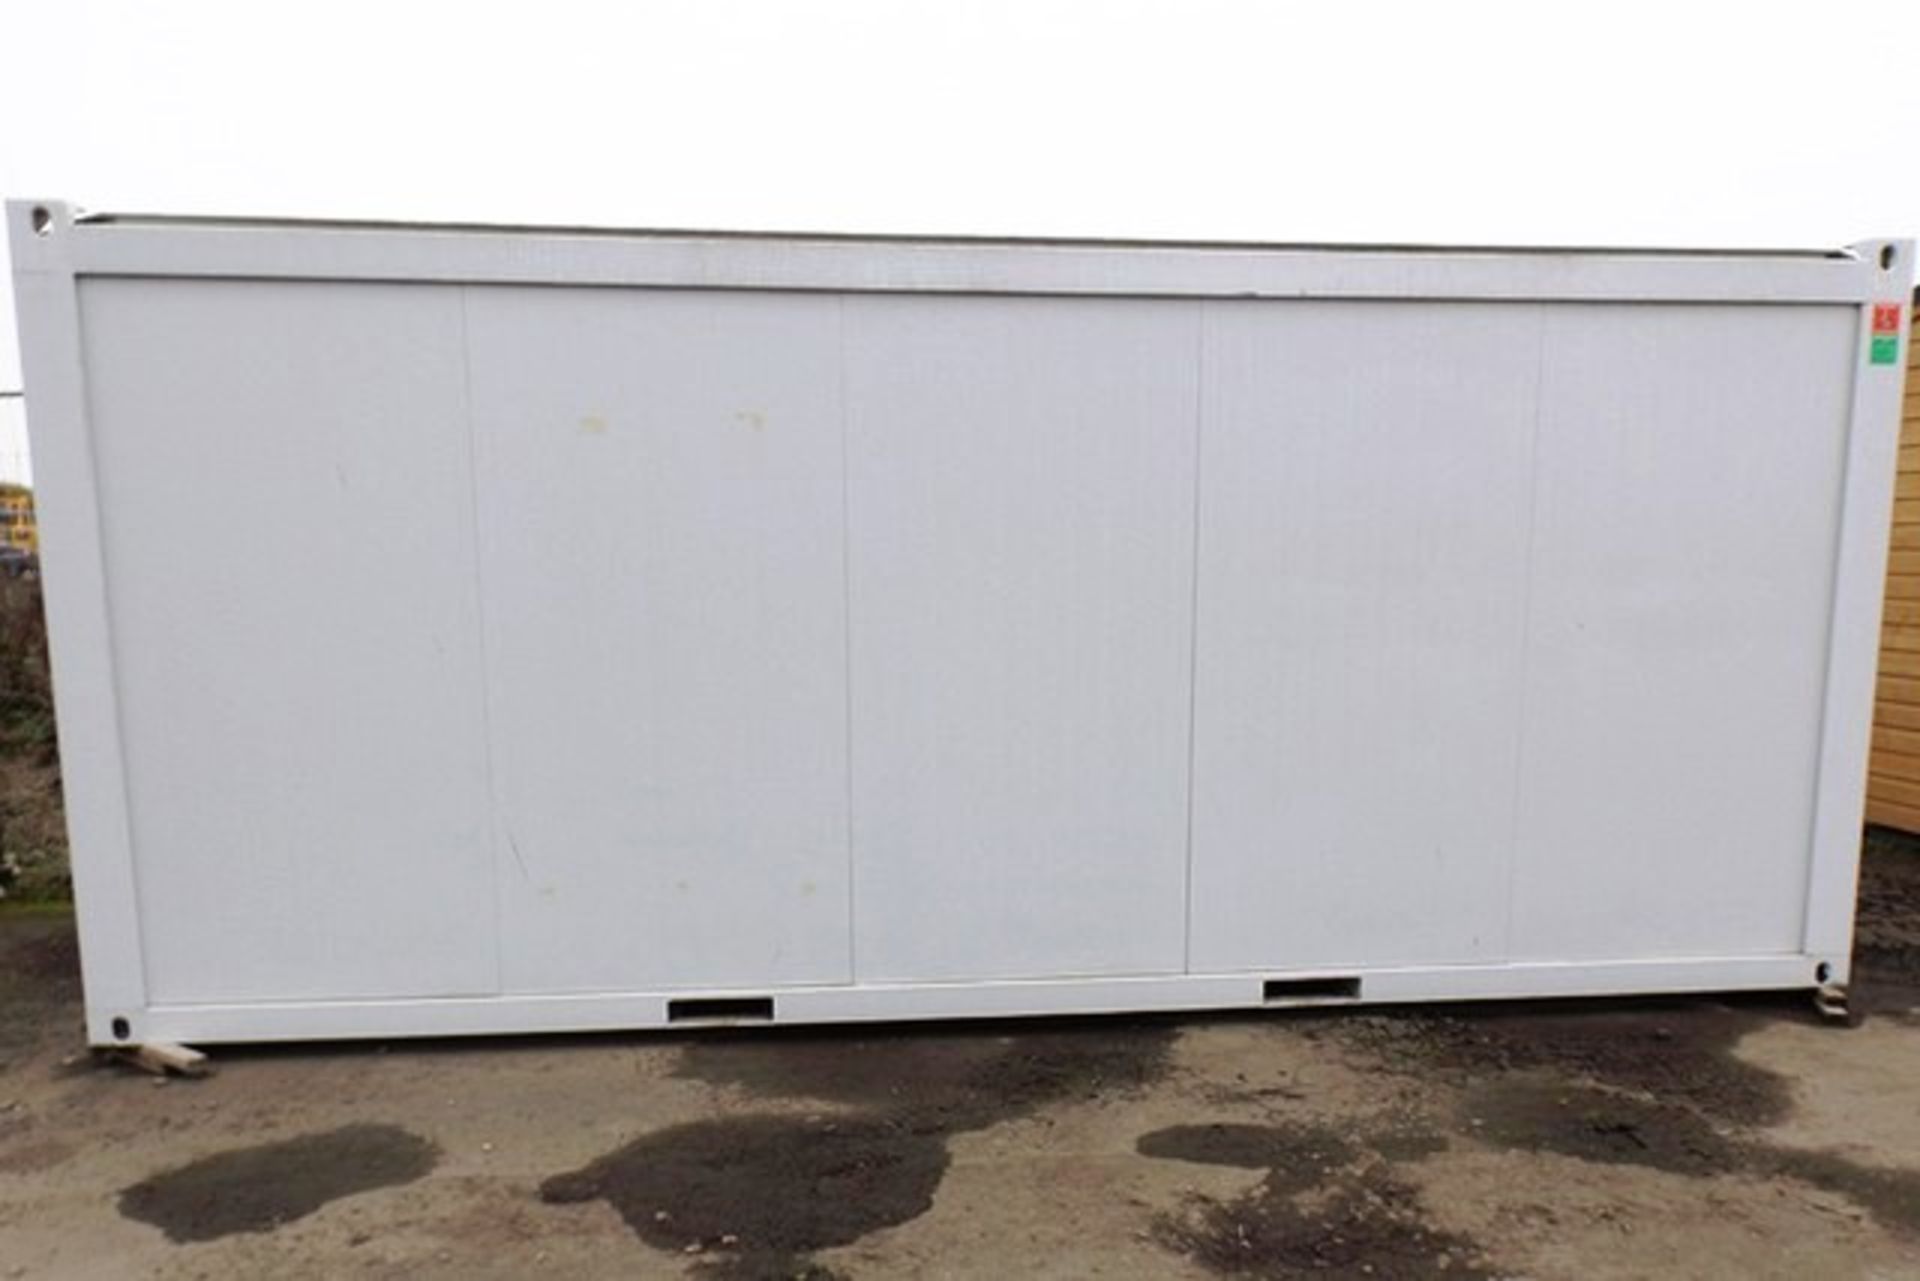 20FT X 8FT EX-DISPLAY SLEEPER UNIT, INSULATED ROOF, WALLS & FLOOR, C/W TOILET, SINK, SHOWER, 2 ELECT - Image 10 of 19